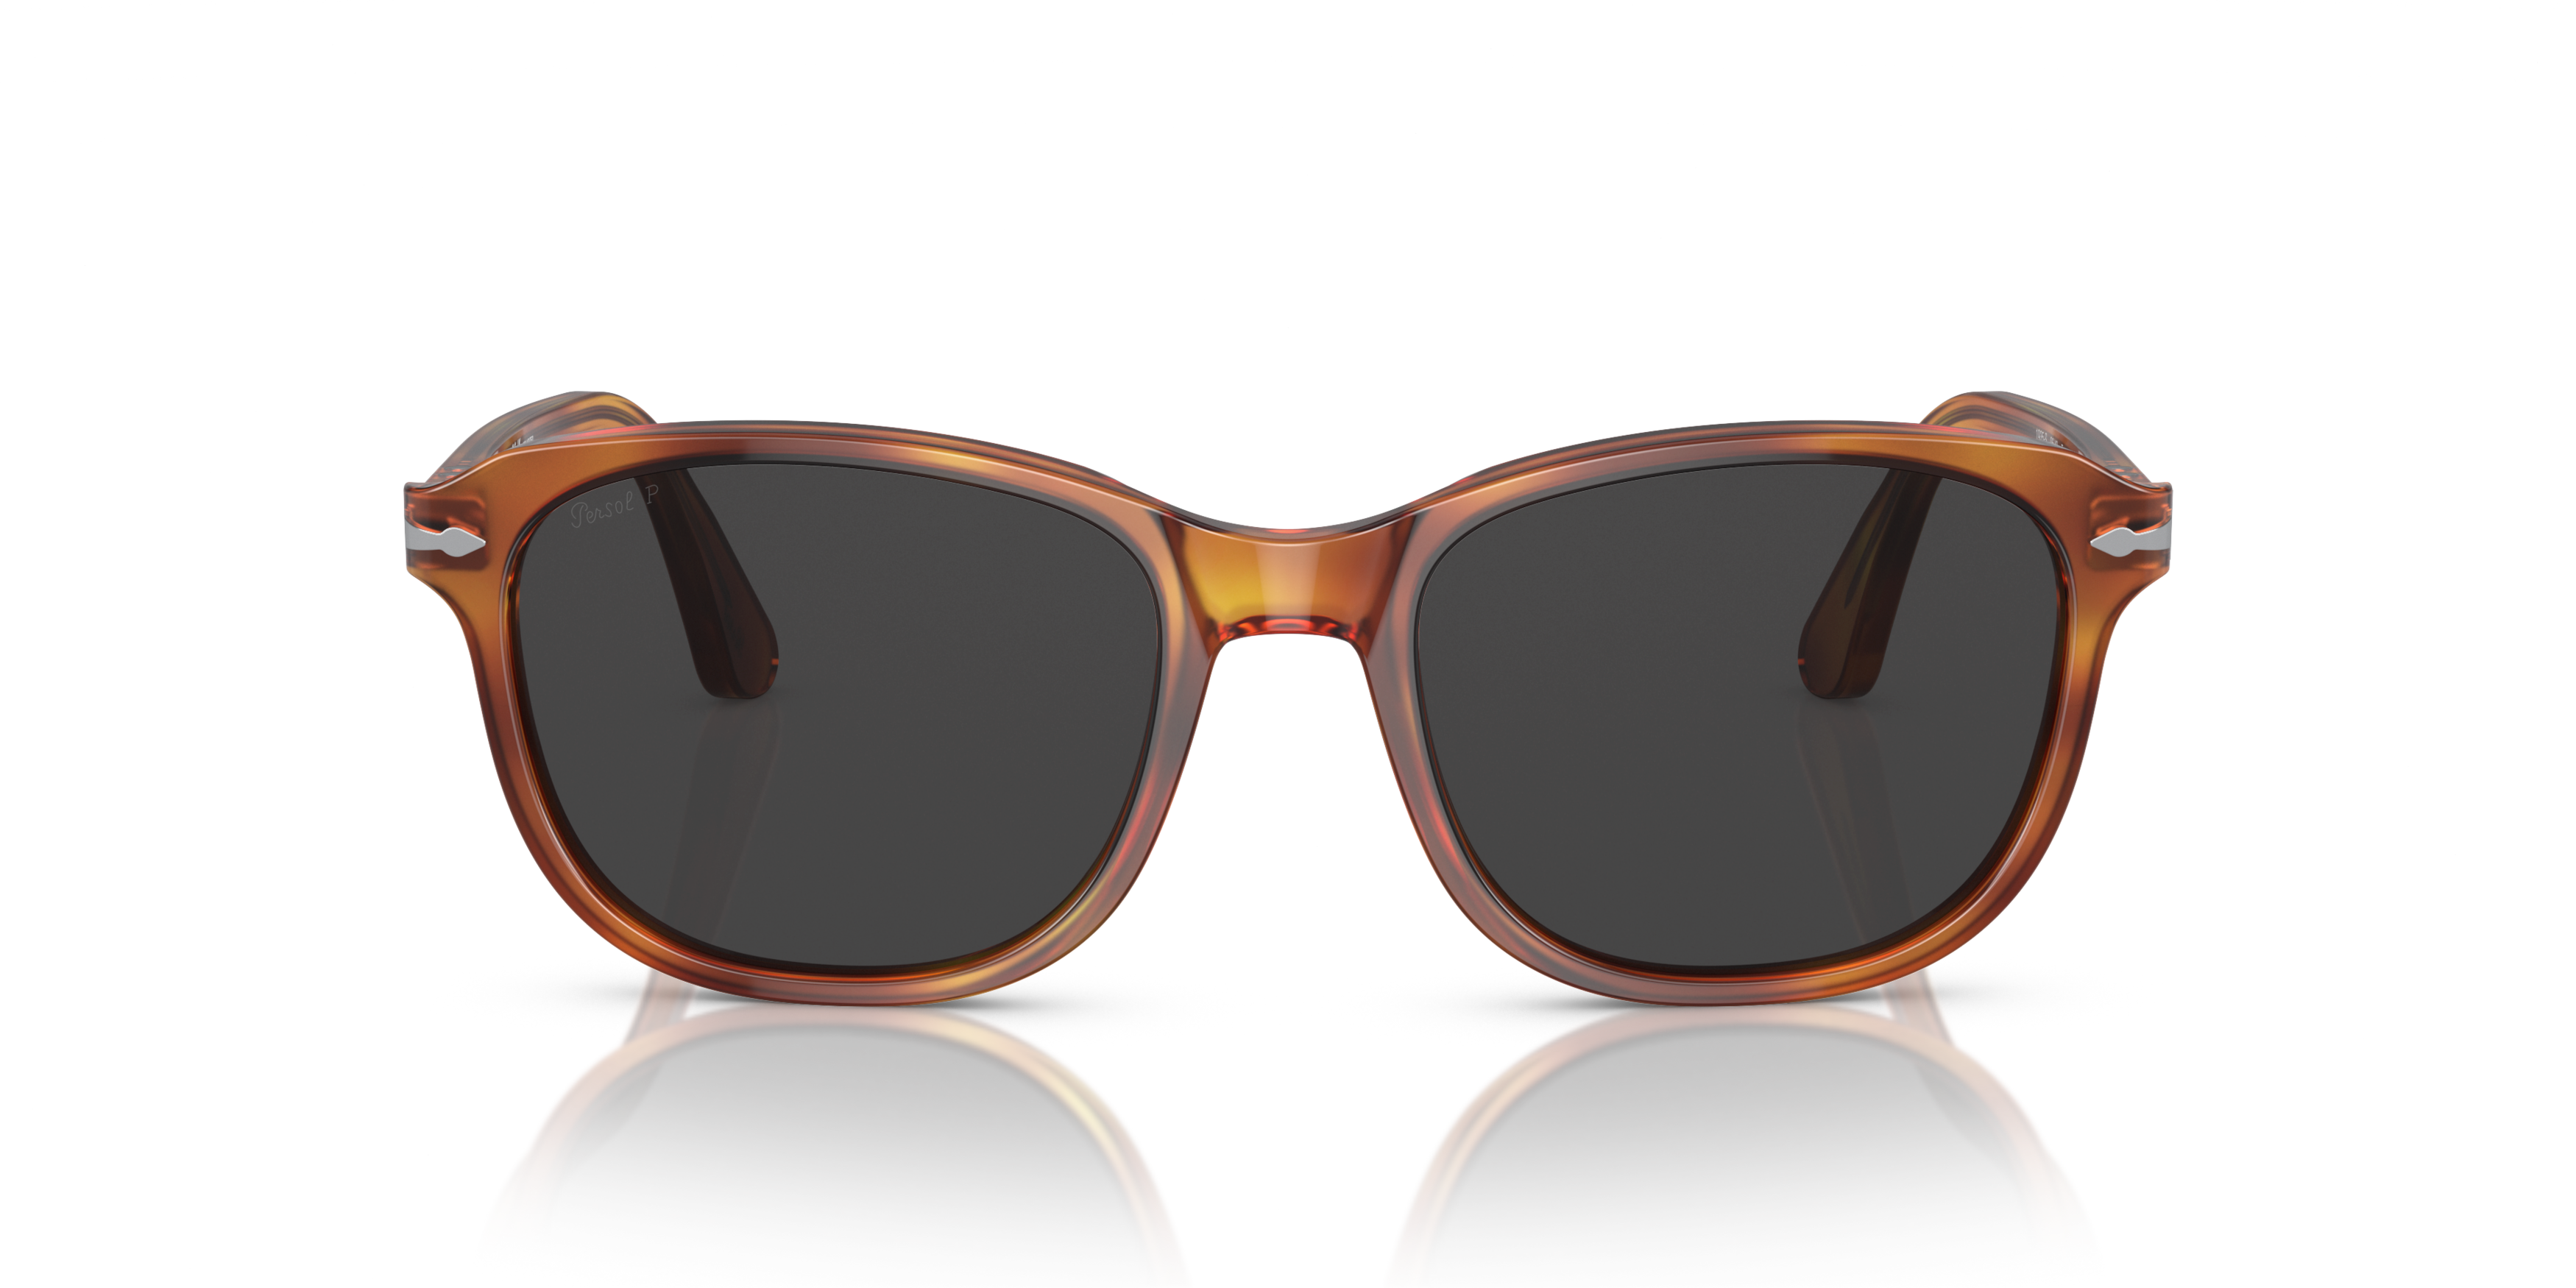 [products.image.front] PERSOL PO1935S 96/48